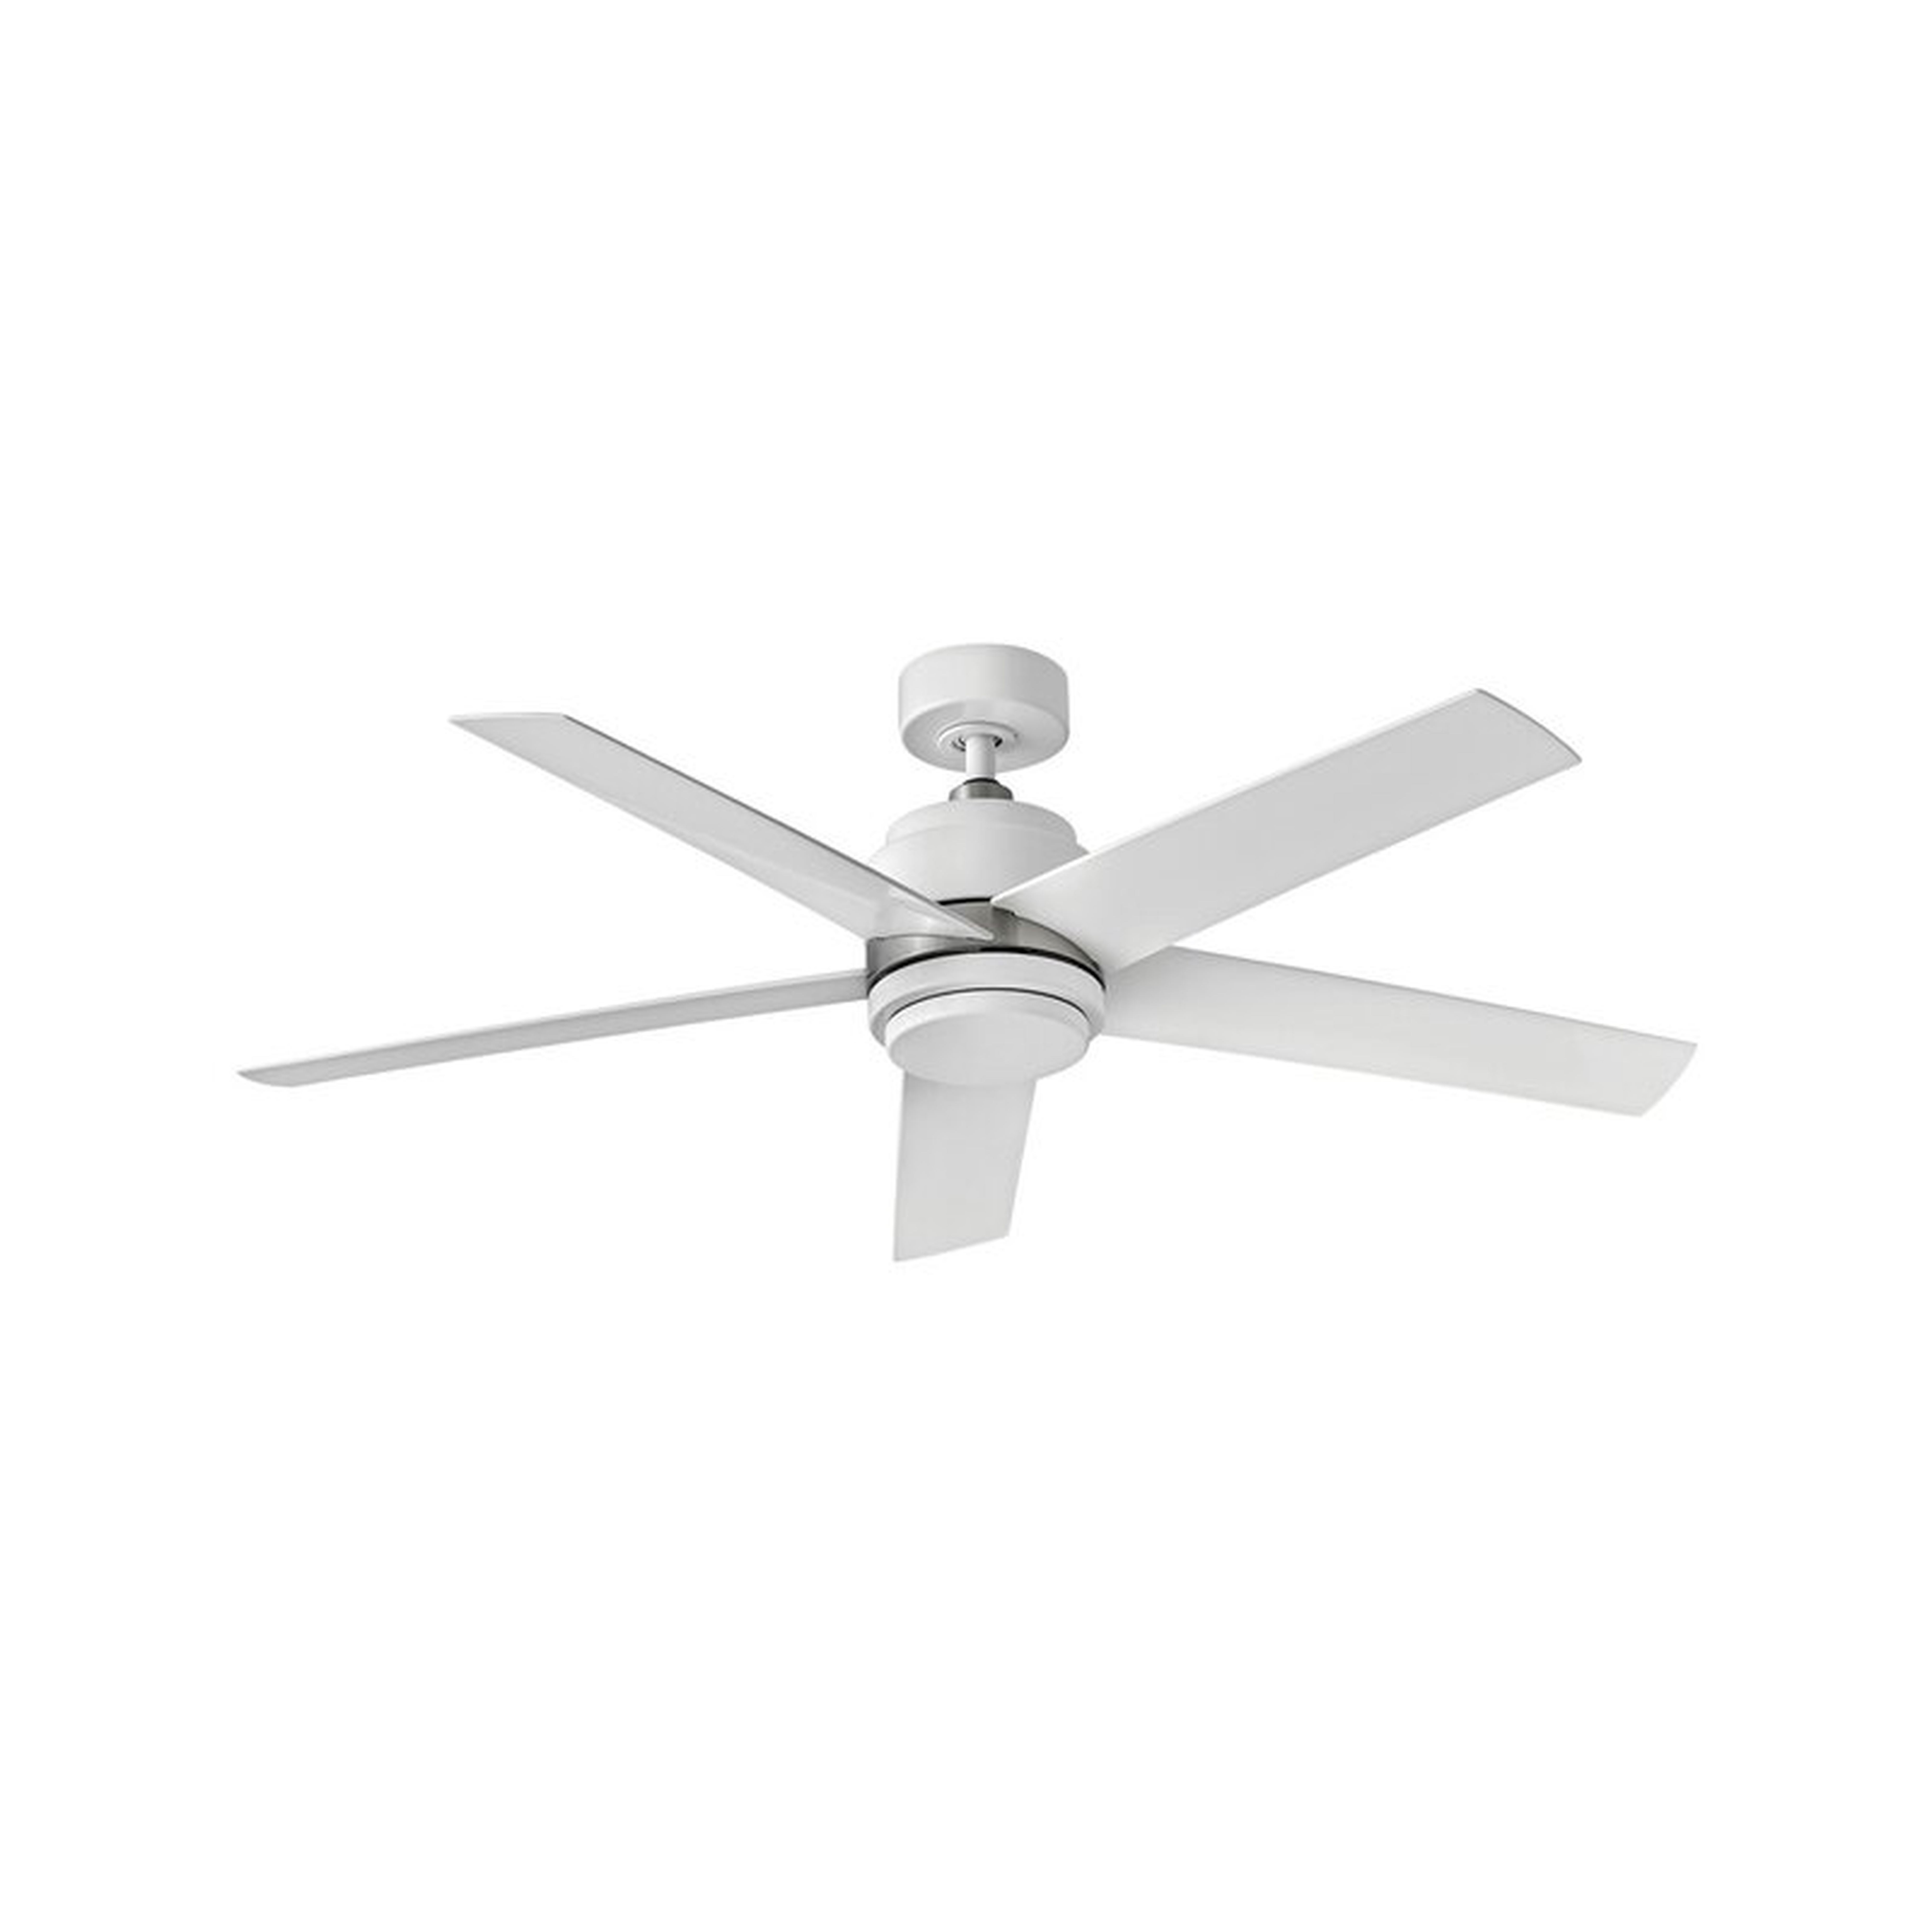 54'' Nante 5 - Blade Outdoor LED Standard Ceiling Fan with Wall Control and Light Kit Included  54'' Nante 5 - Blade Outdoor LED Standard Ceiling Fan with Wall Control and Light Kit Included  54'' Nante 5 - Blade Outdoor LED Standard Ceiling Fan with Wall - Wayfair